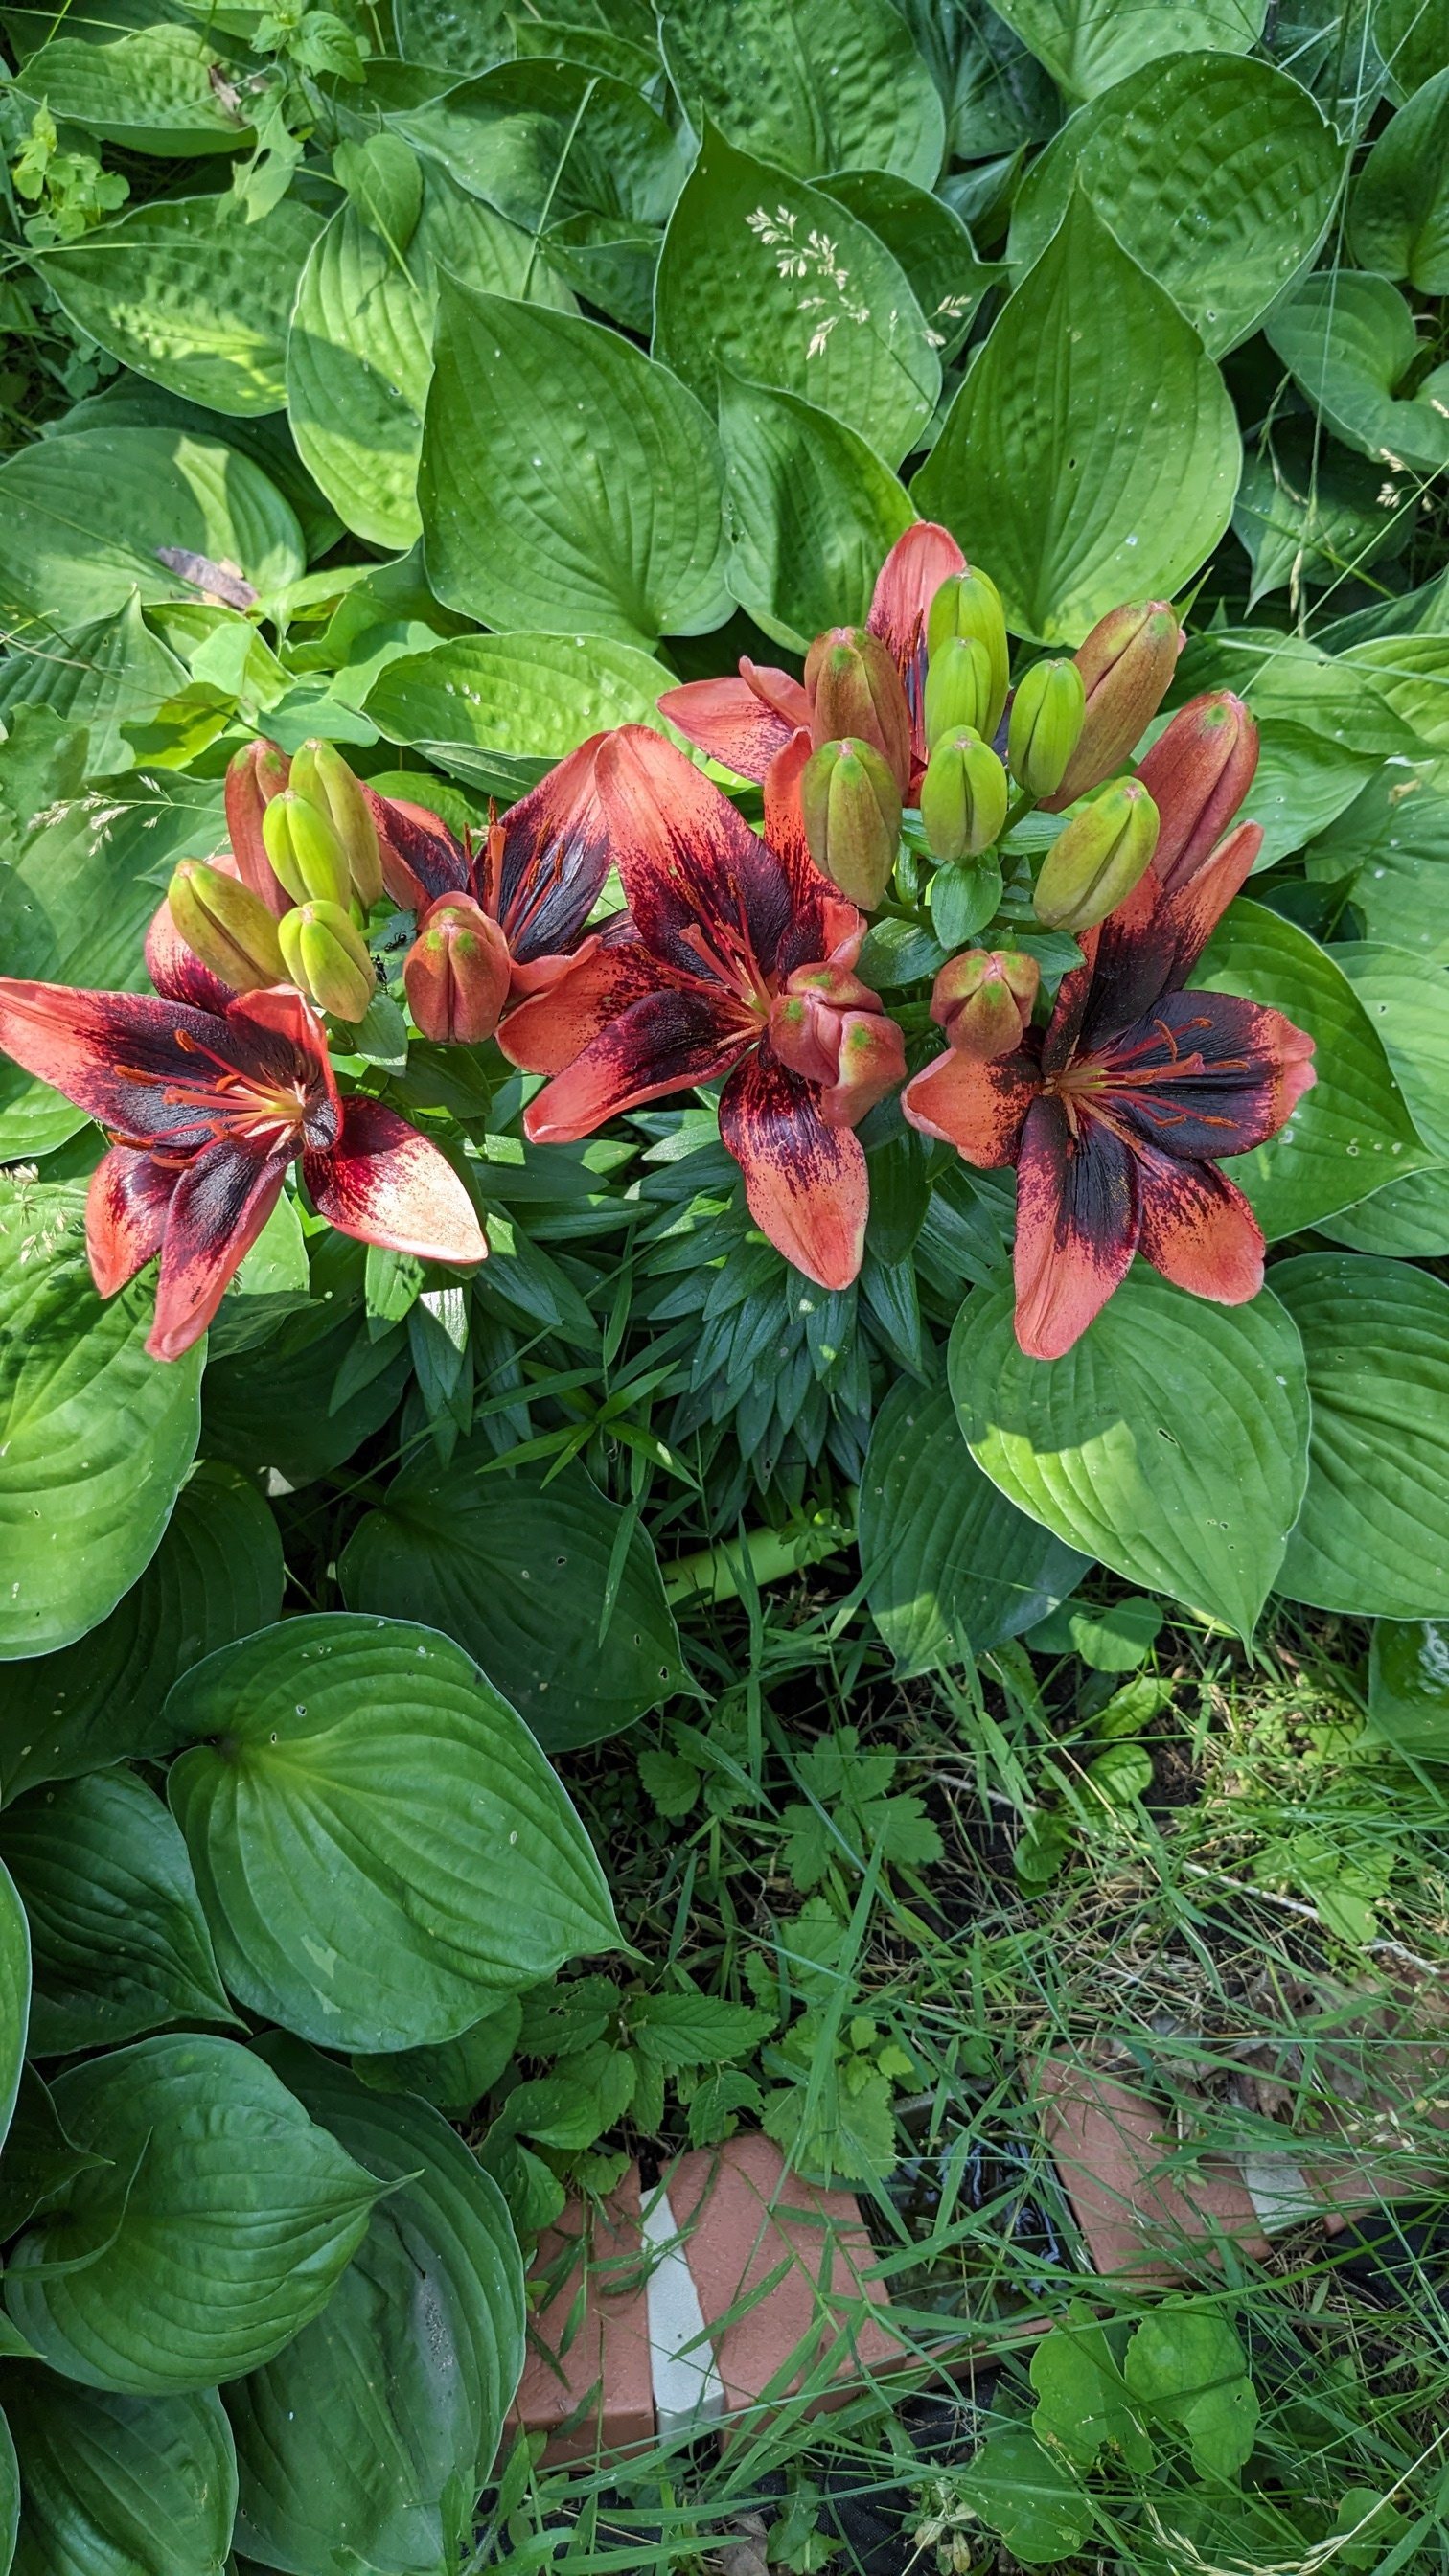 Two-tone lilies with deep orange petals and a dark red throat